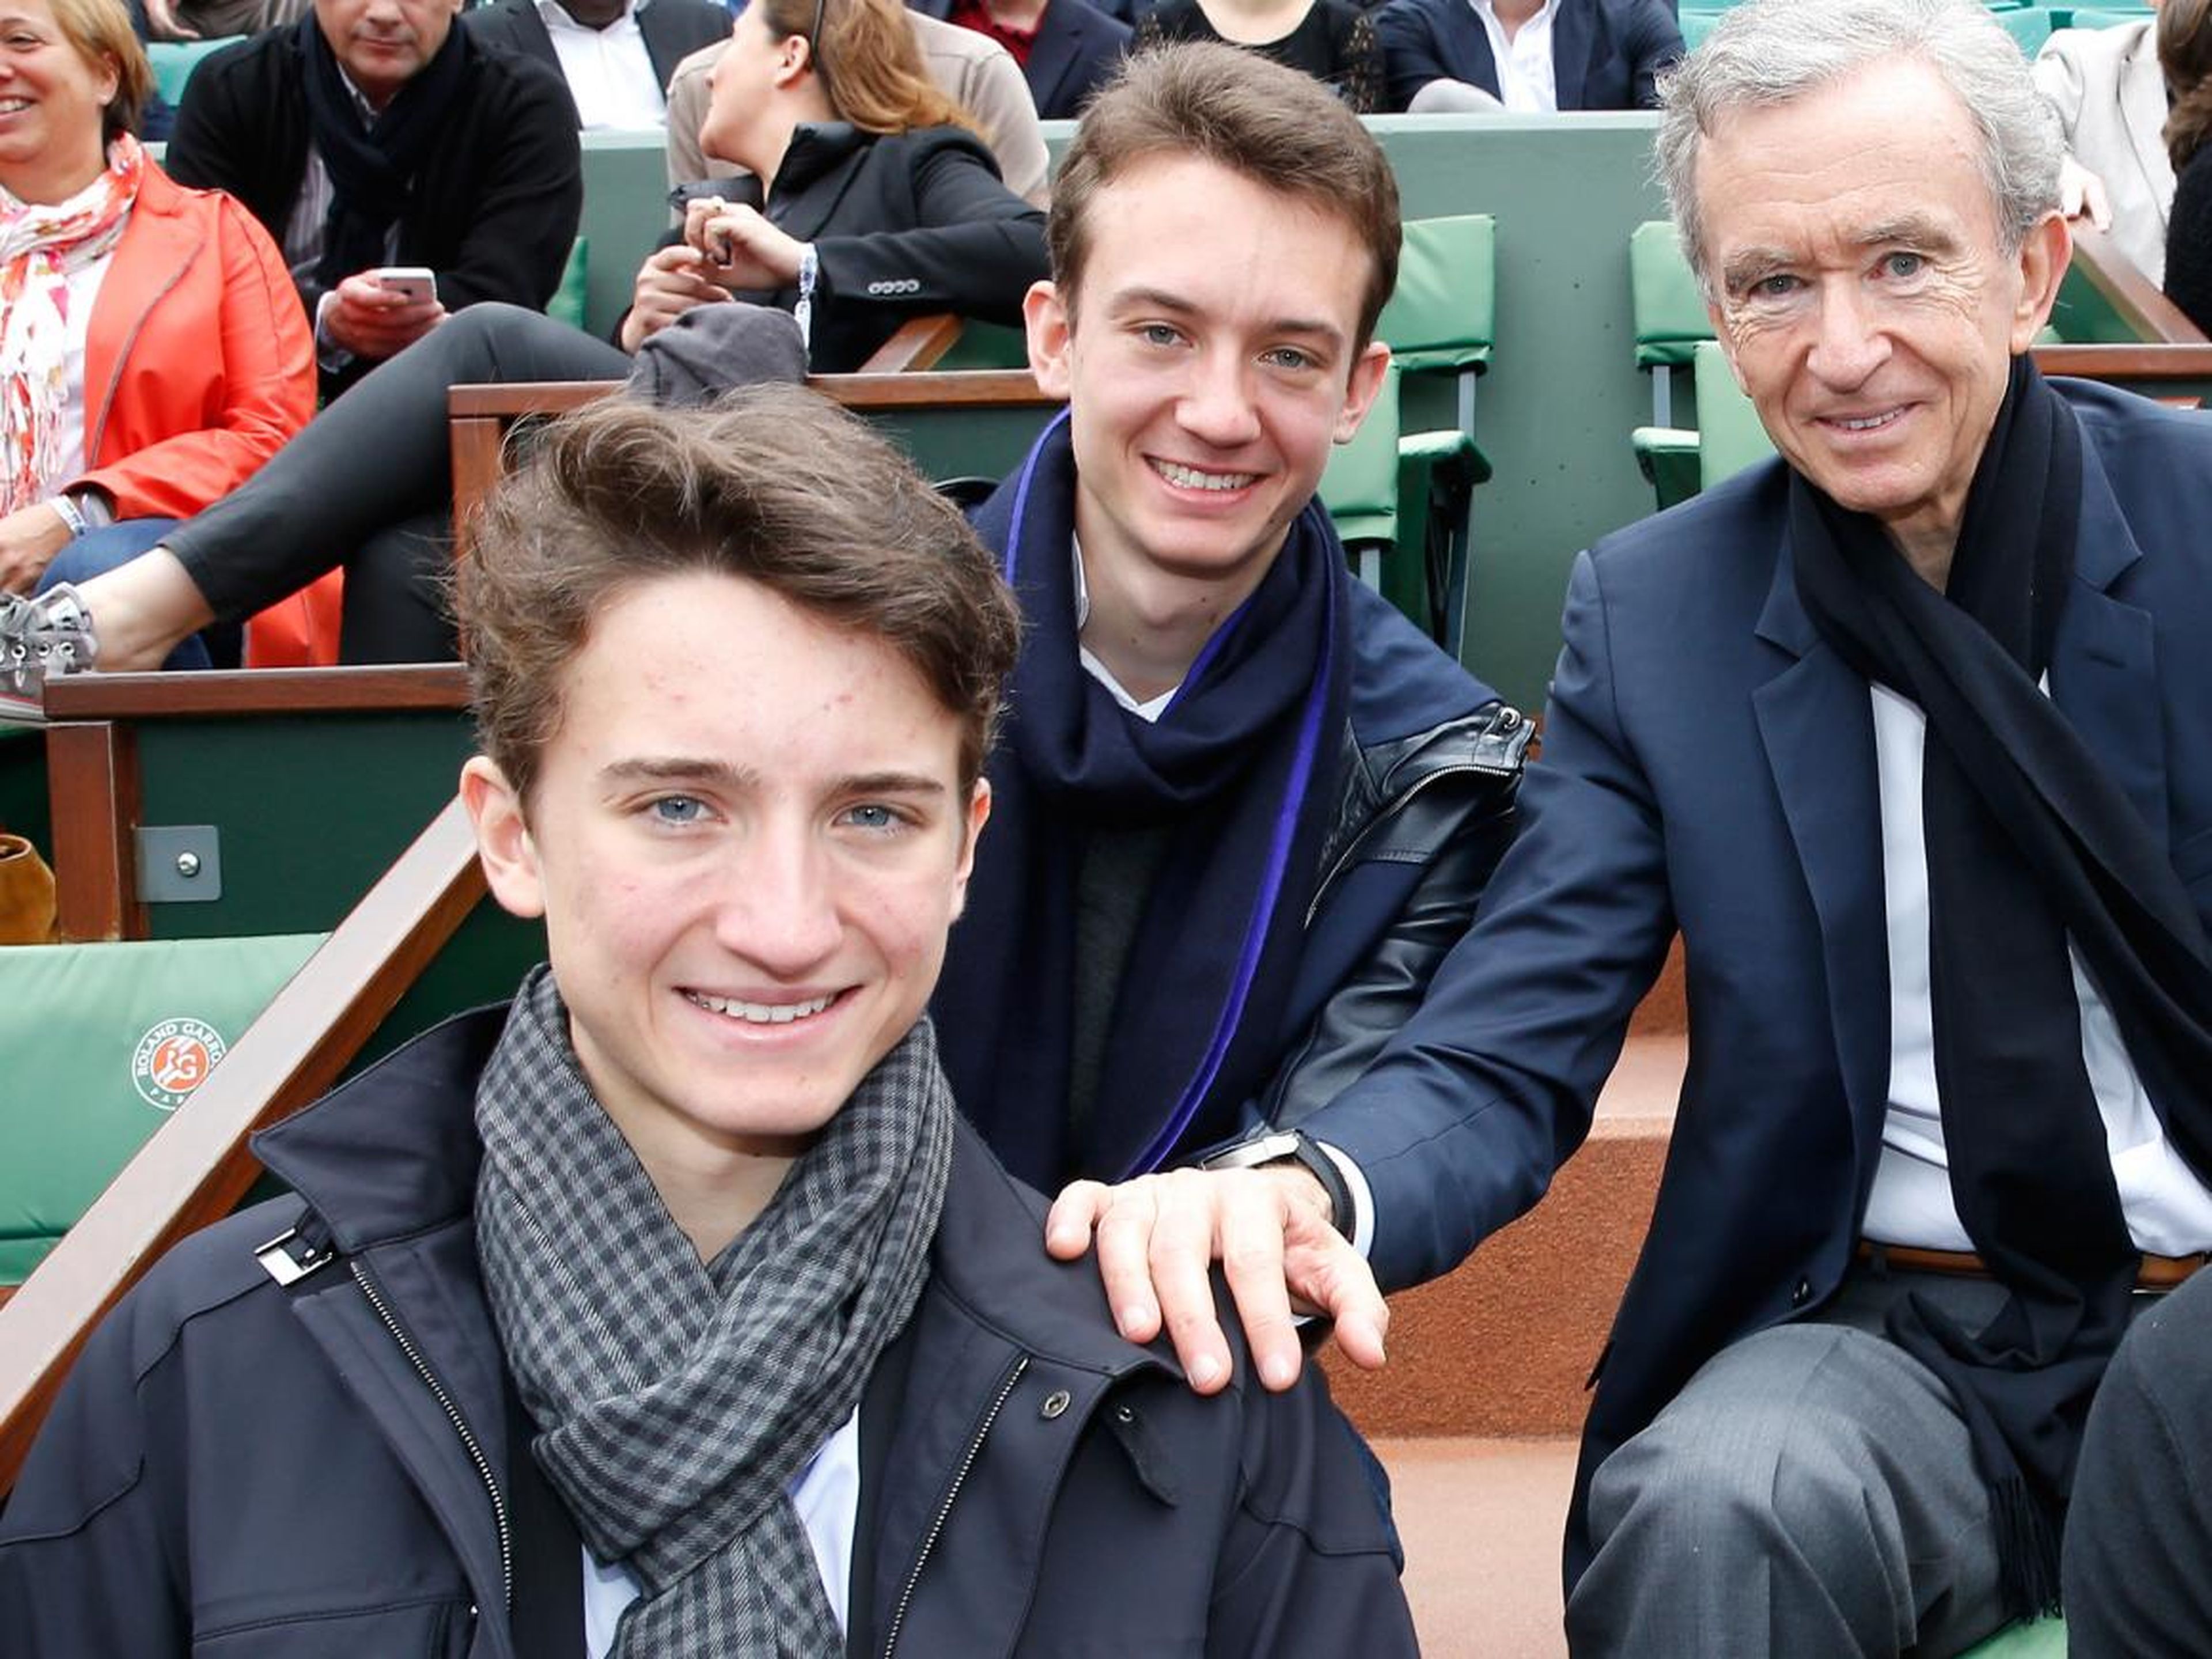 Jean Arnault (front left) with his brother, Frederic (center) and father, Bernard (right).